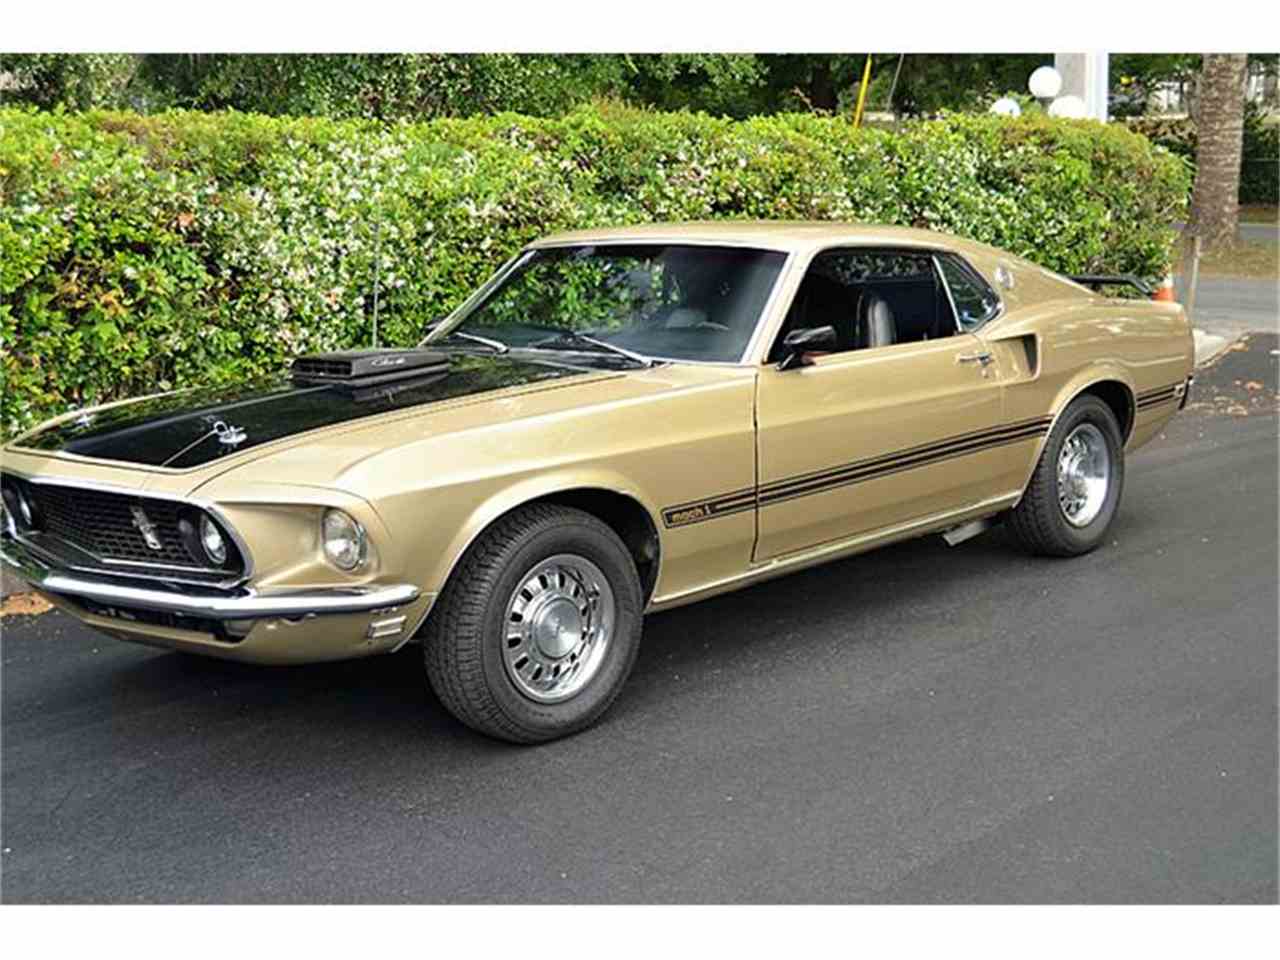 Nice wallpapers Ford Mustang Mach I 1280x960px